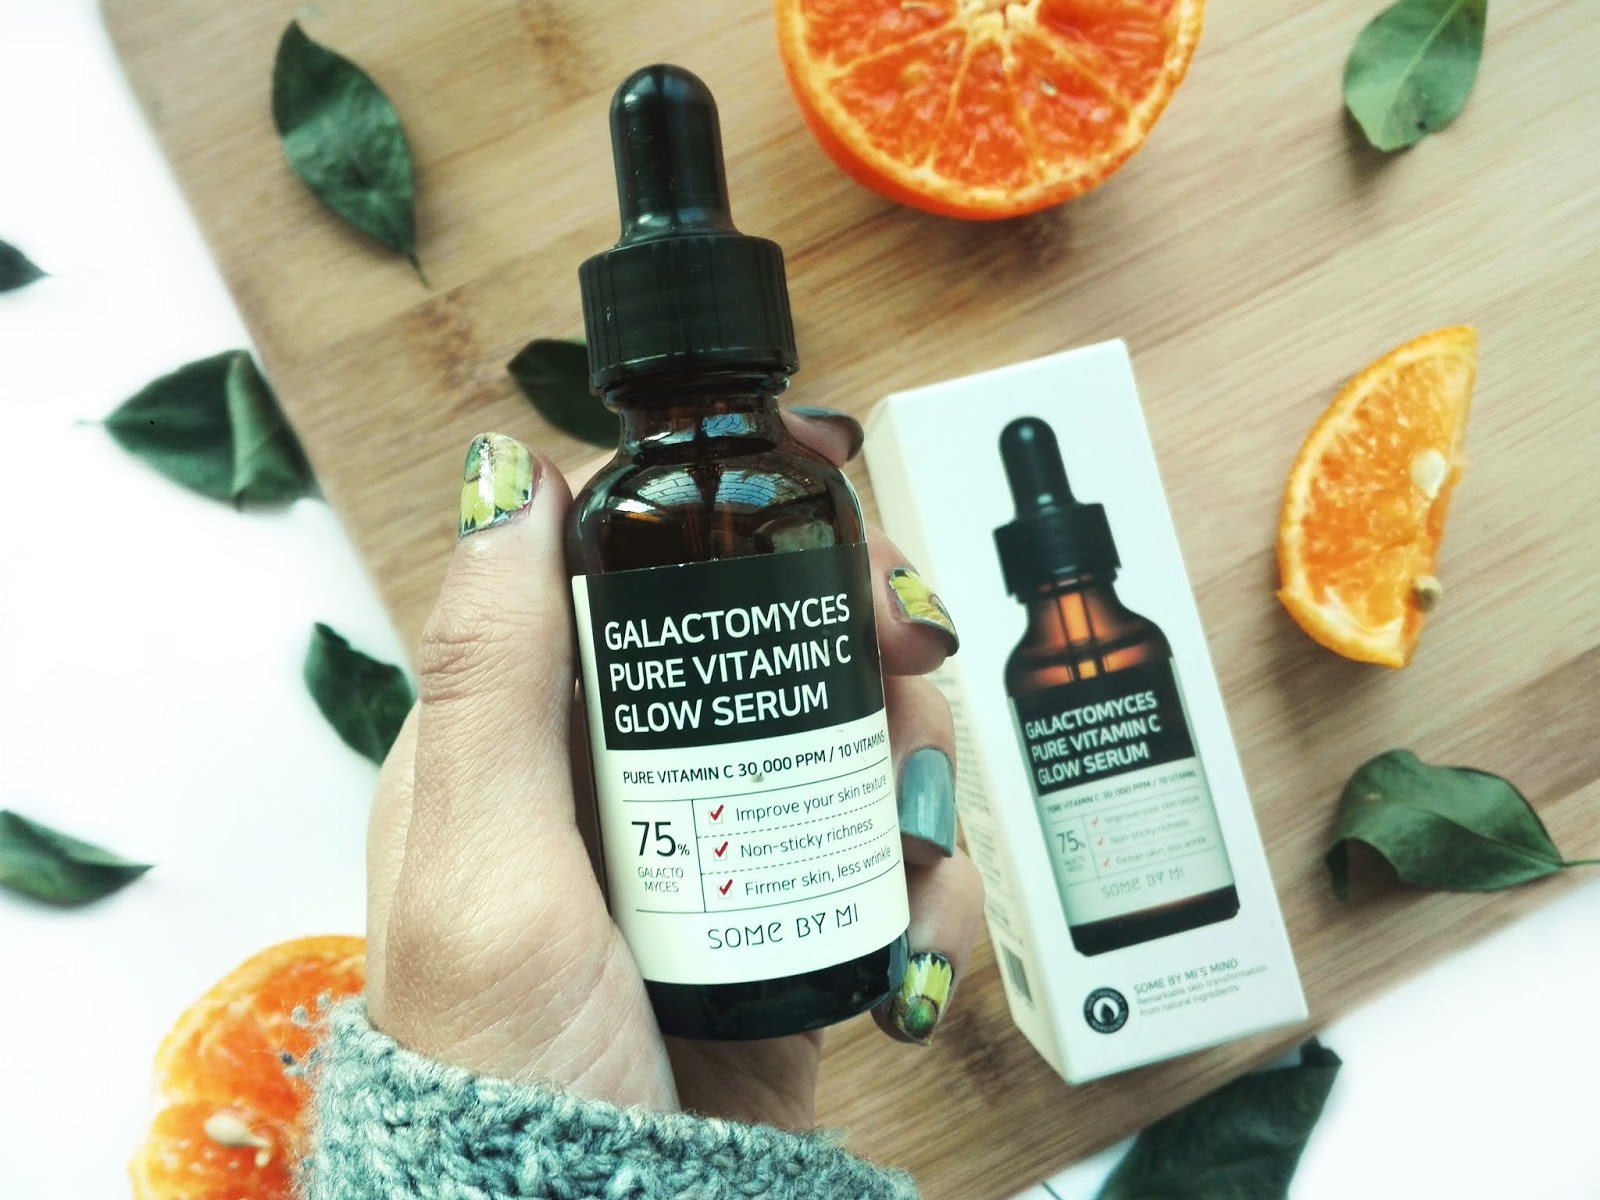 Review SOME BY MI GALACTOMYCES PURE VITAMIN C GLOW SERUM ...